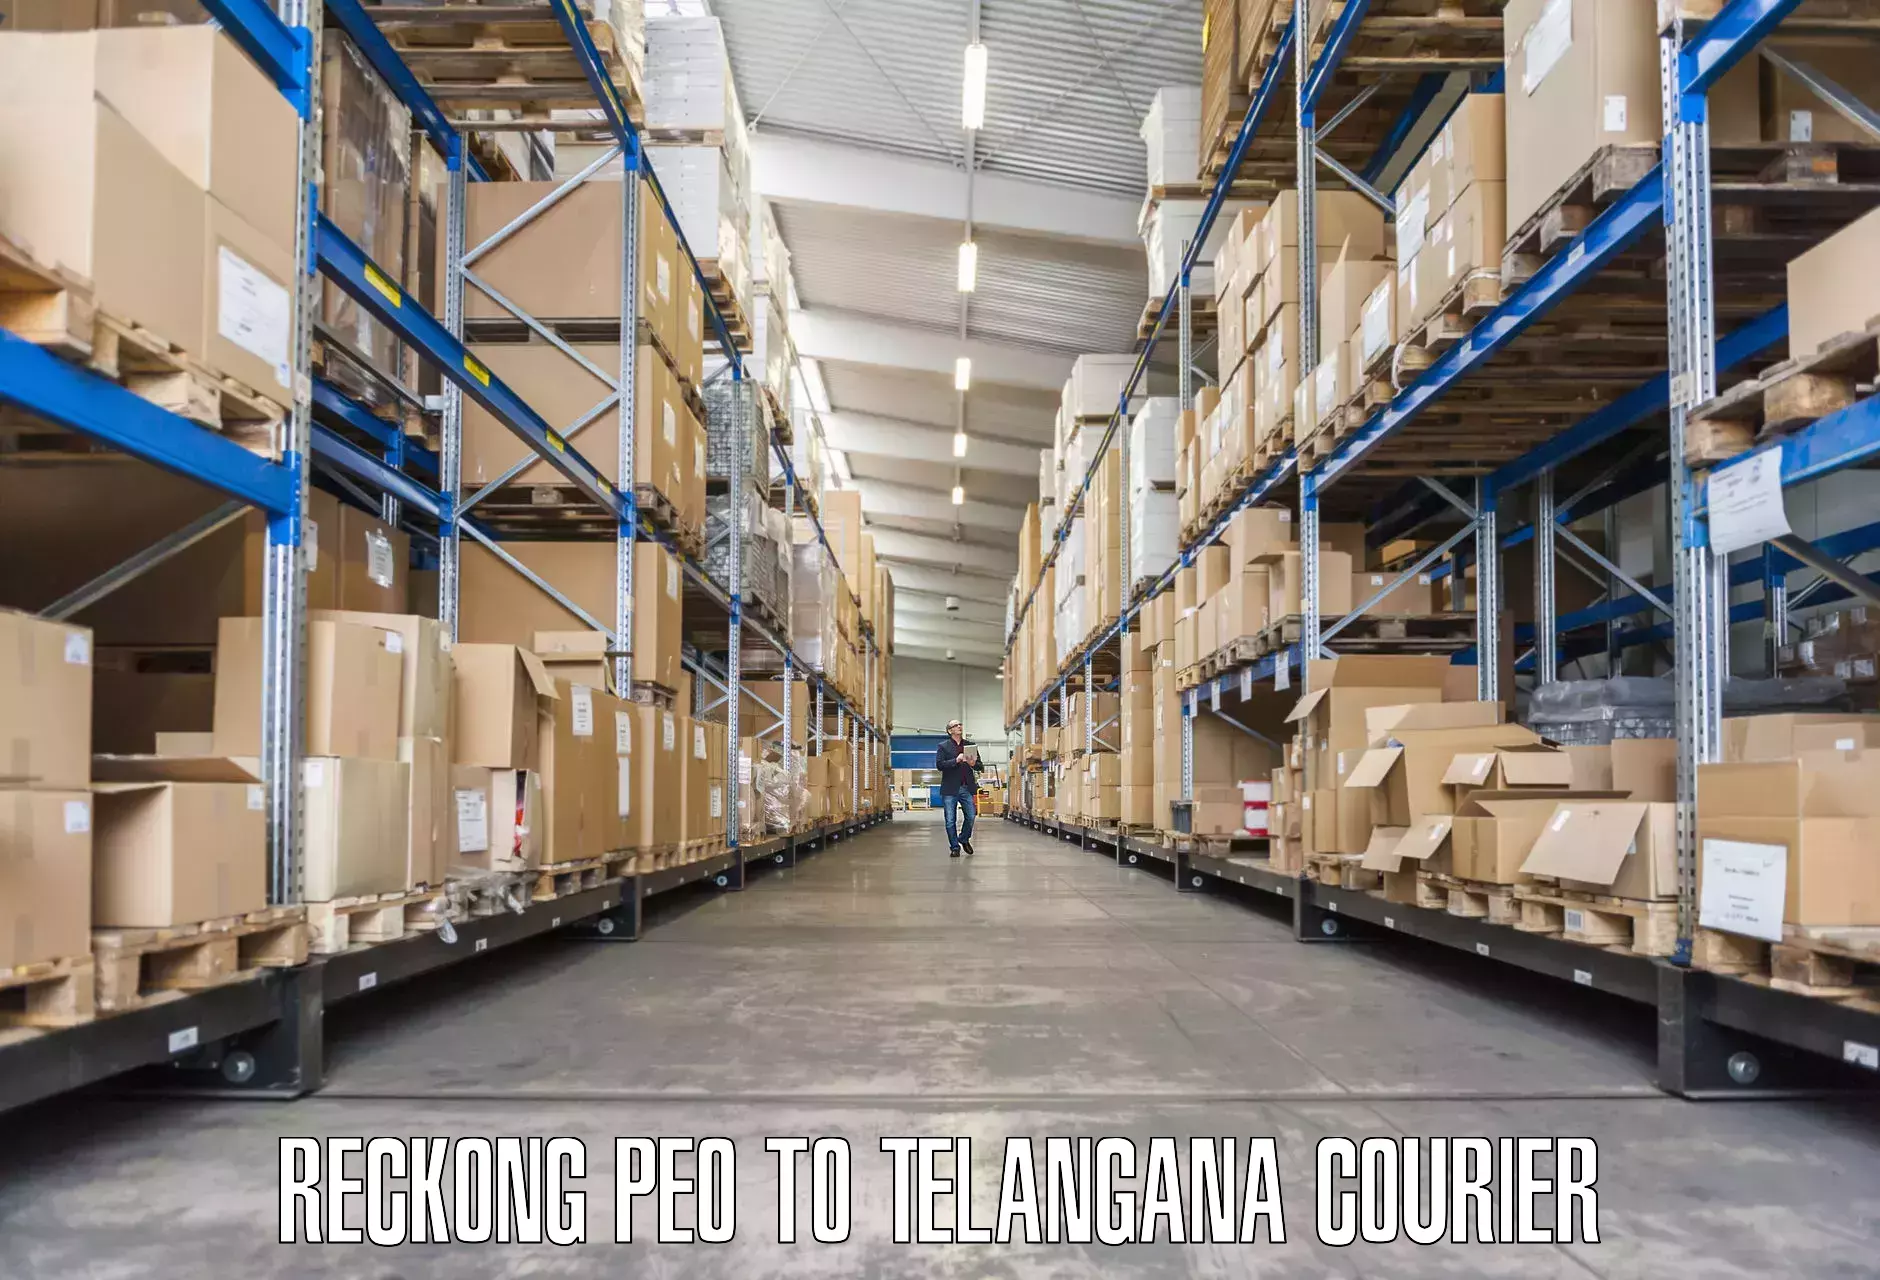 Quality relocation assistance Reckong Peo to Telangana